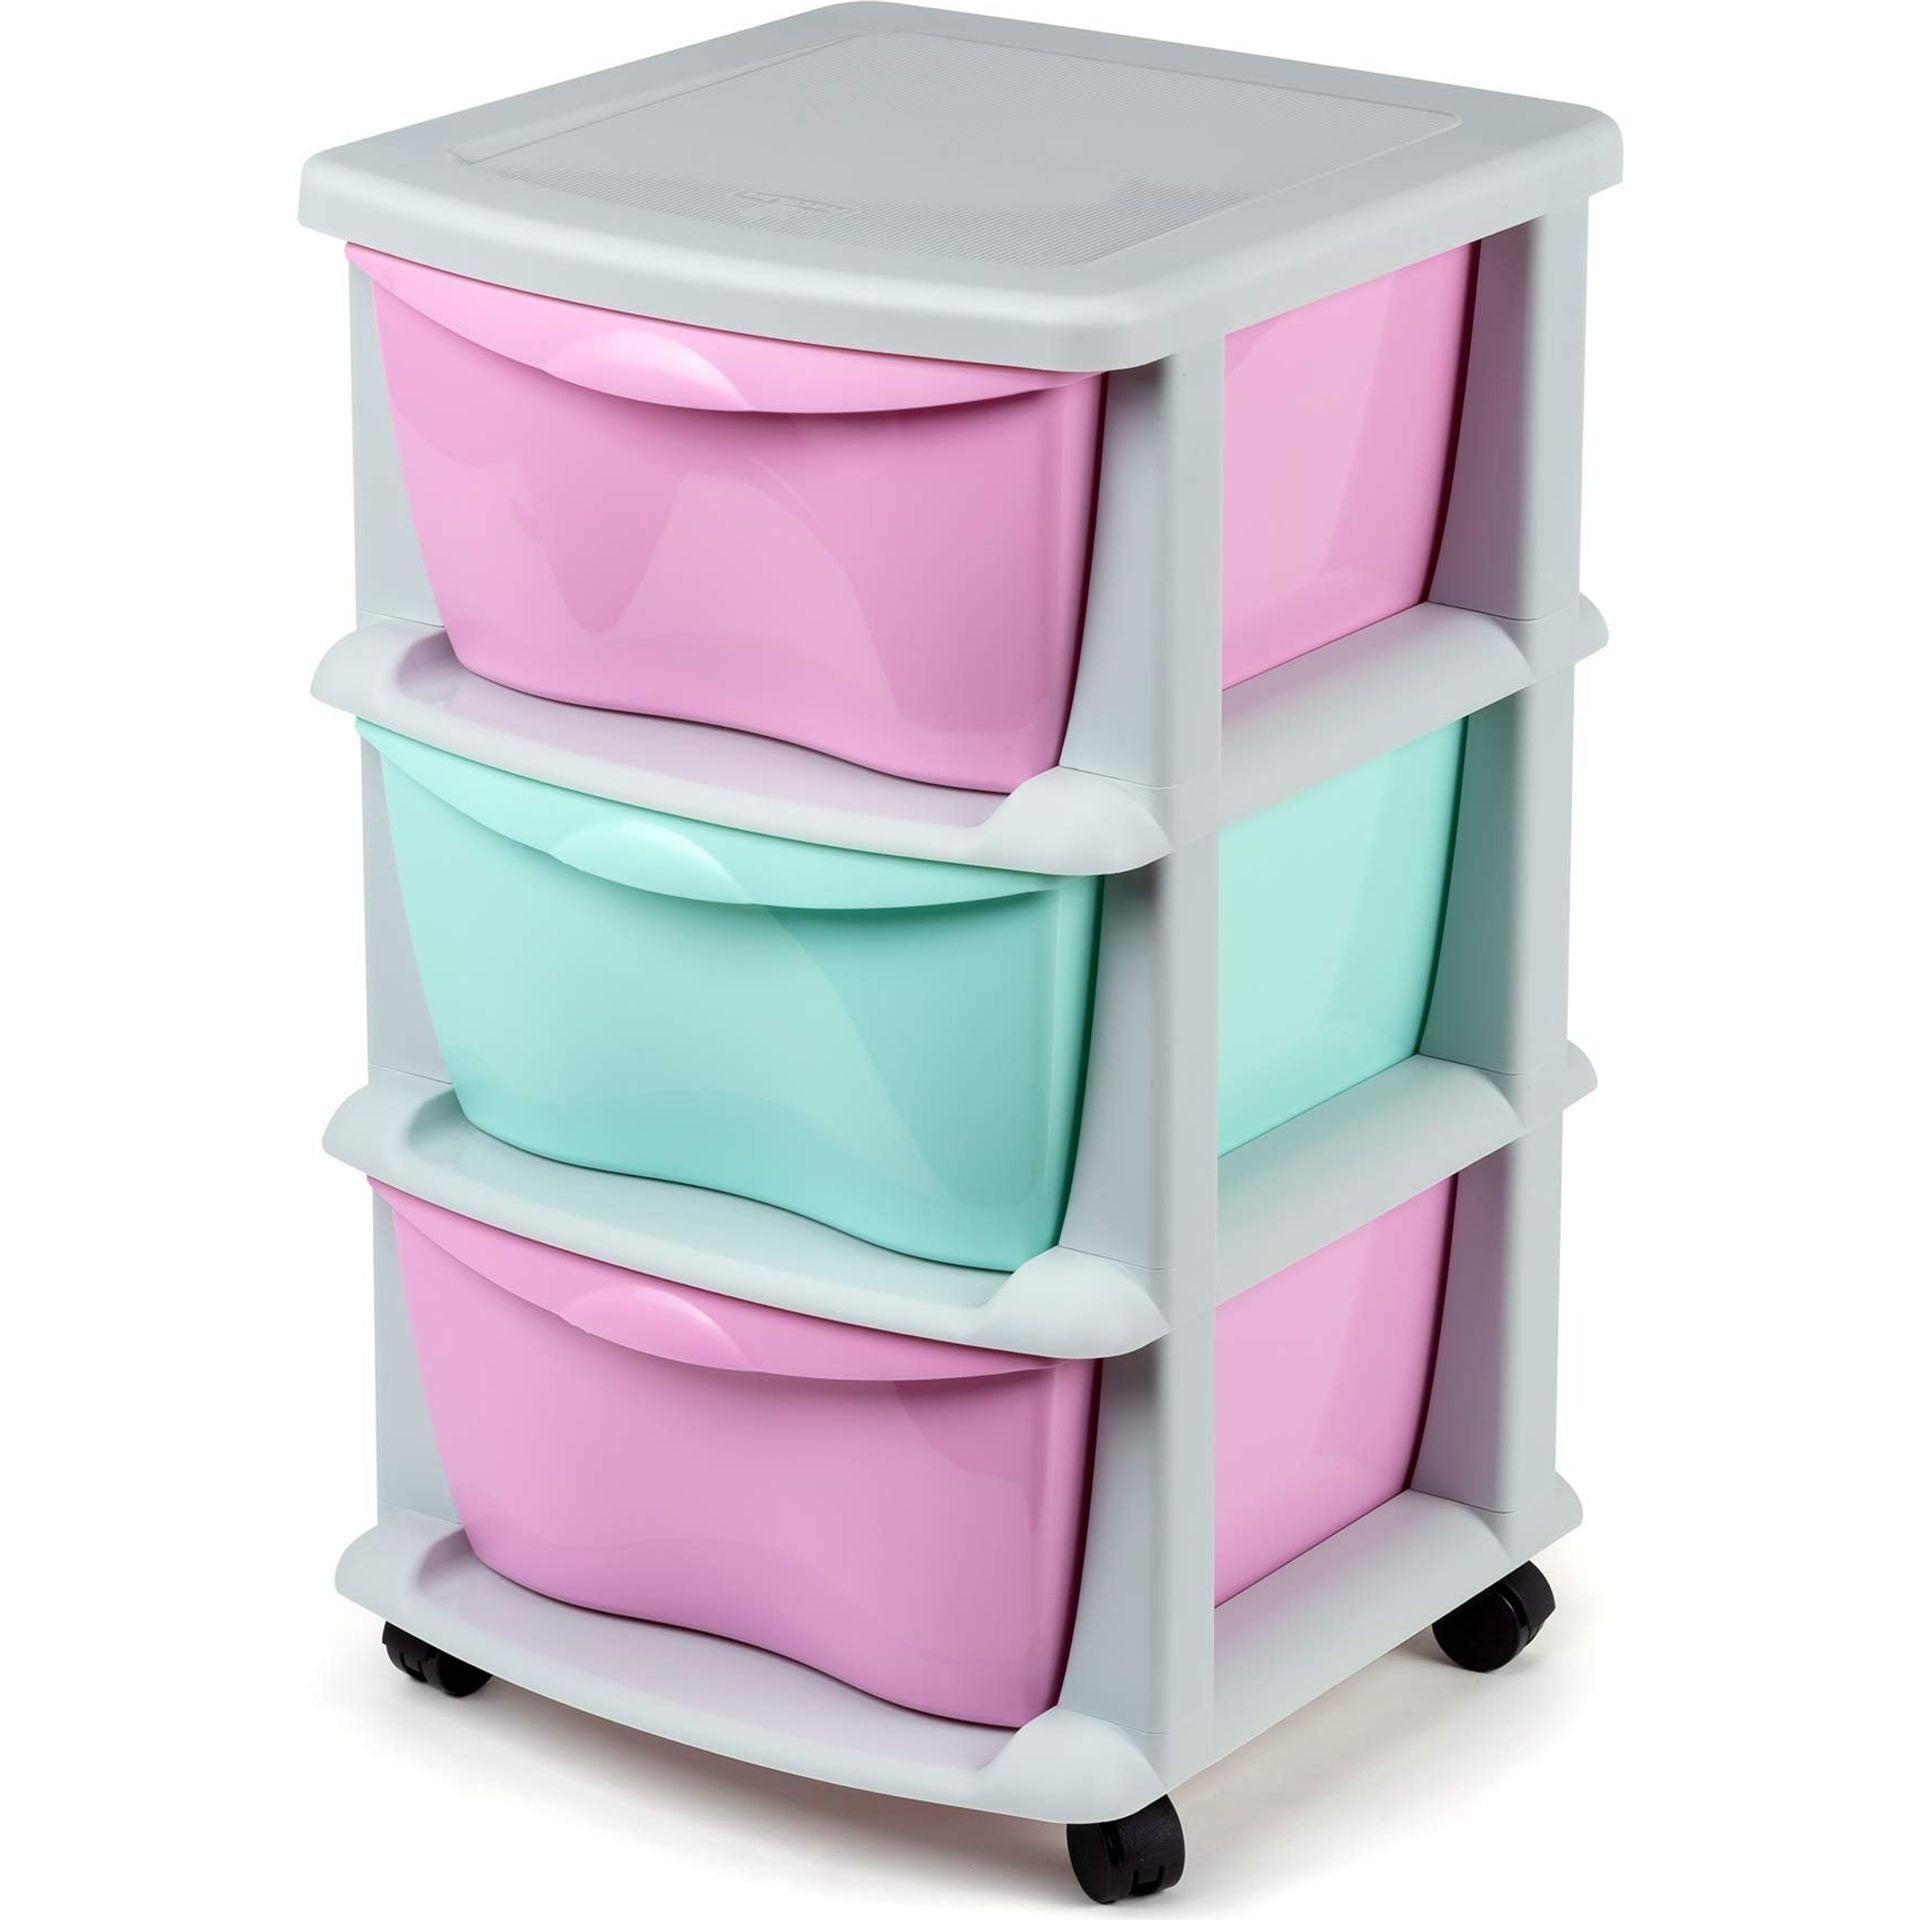 Maxi Nature Plastic Storage Drawers on Wheels - Sturdy Frame, Durable, Heavy Duty Organiser - 3 Tier Large Storage Unit for Kids Bedroom, Bathroom, Office - Made in Europe - Pink/Blue